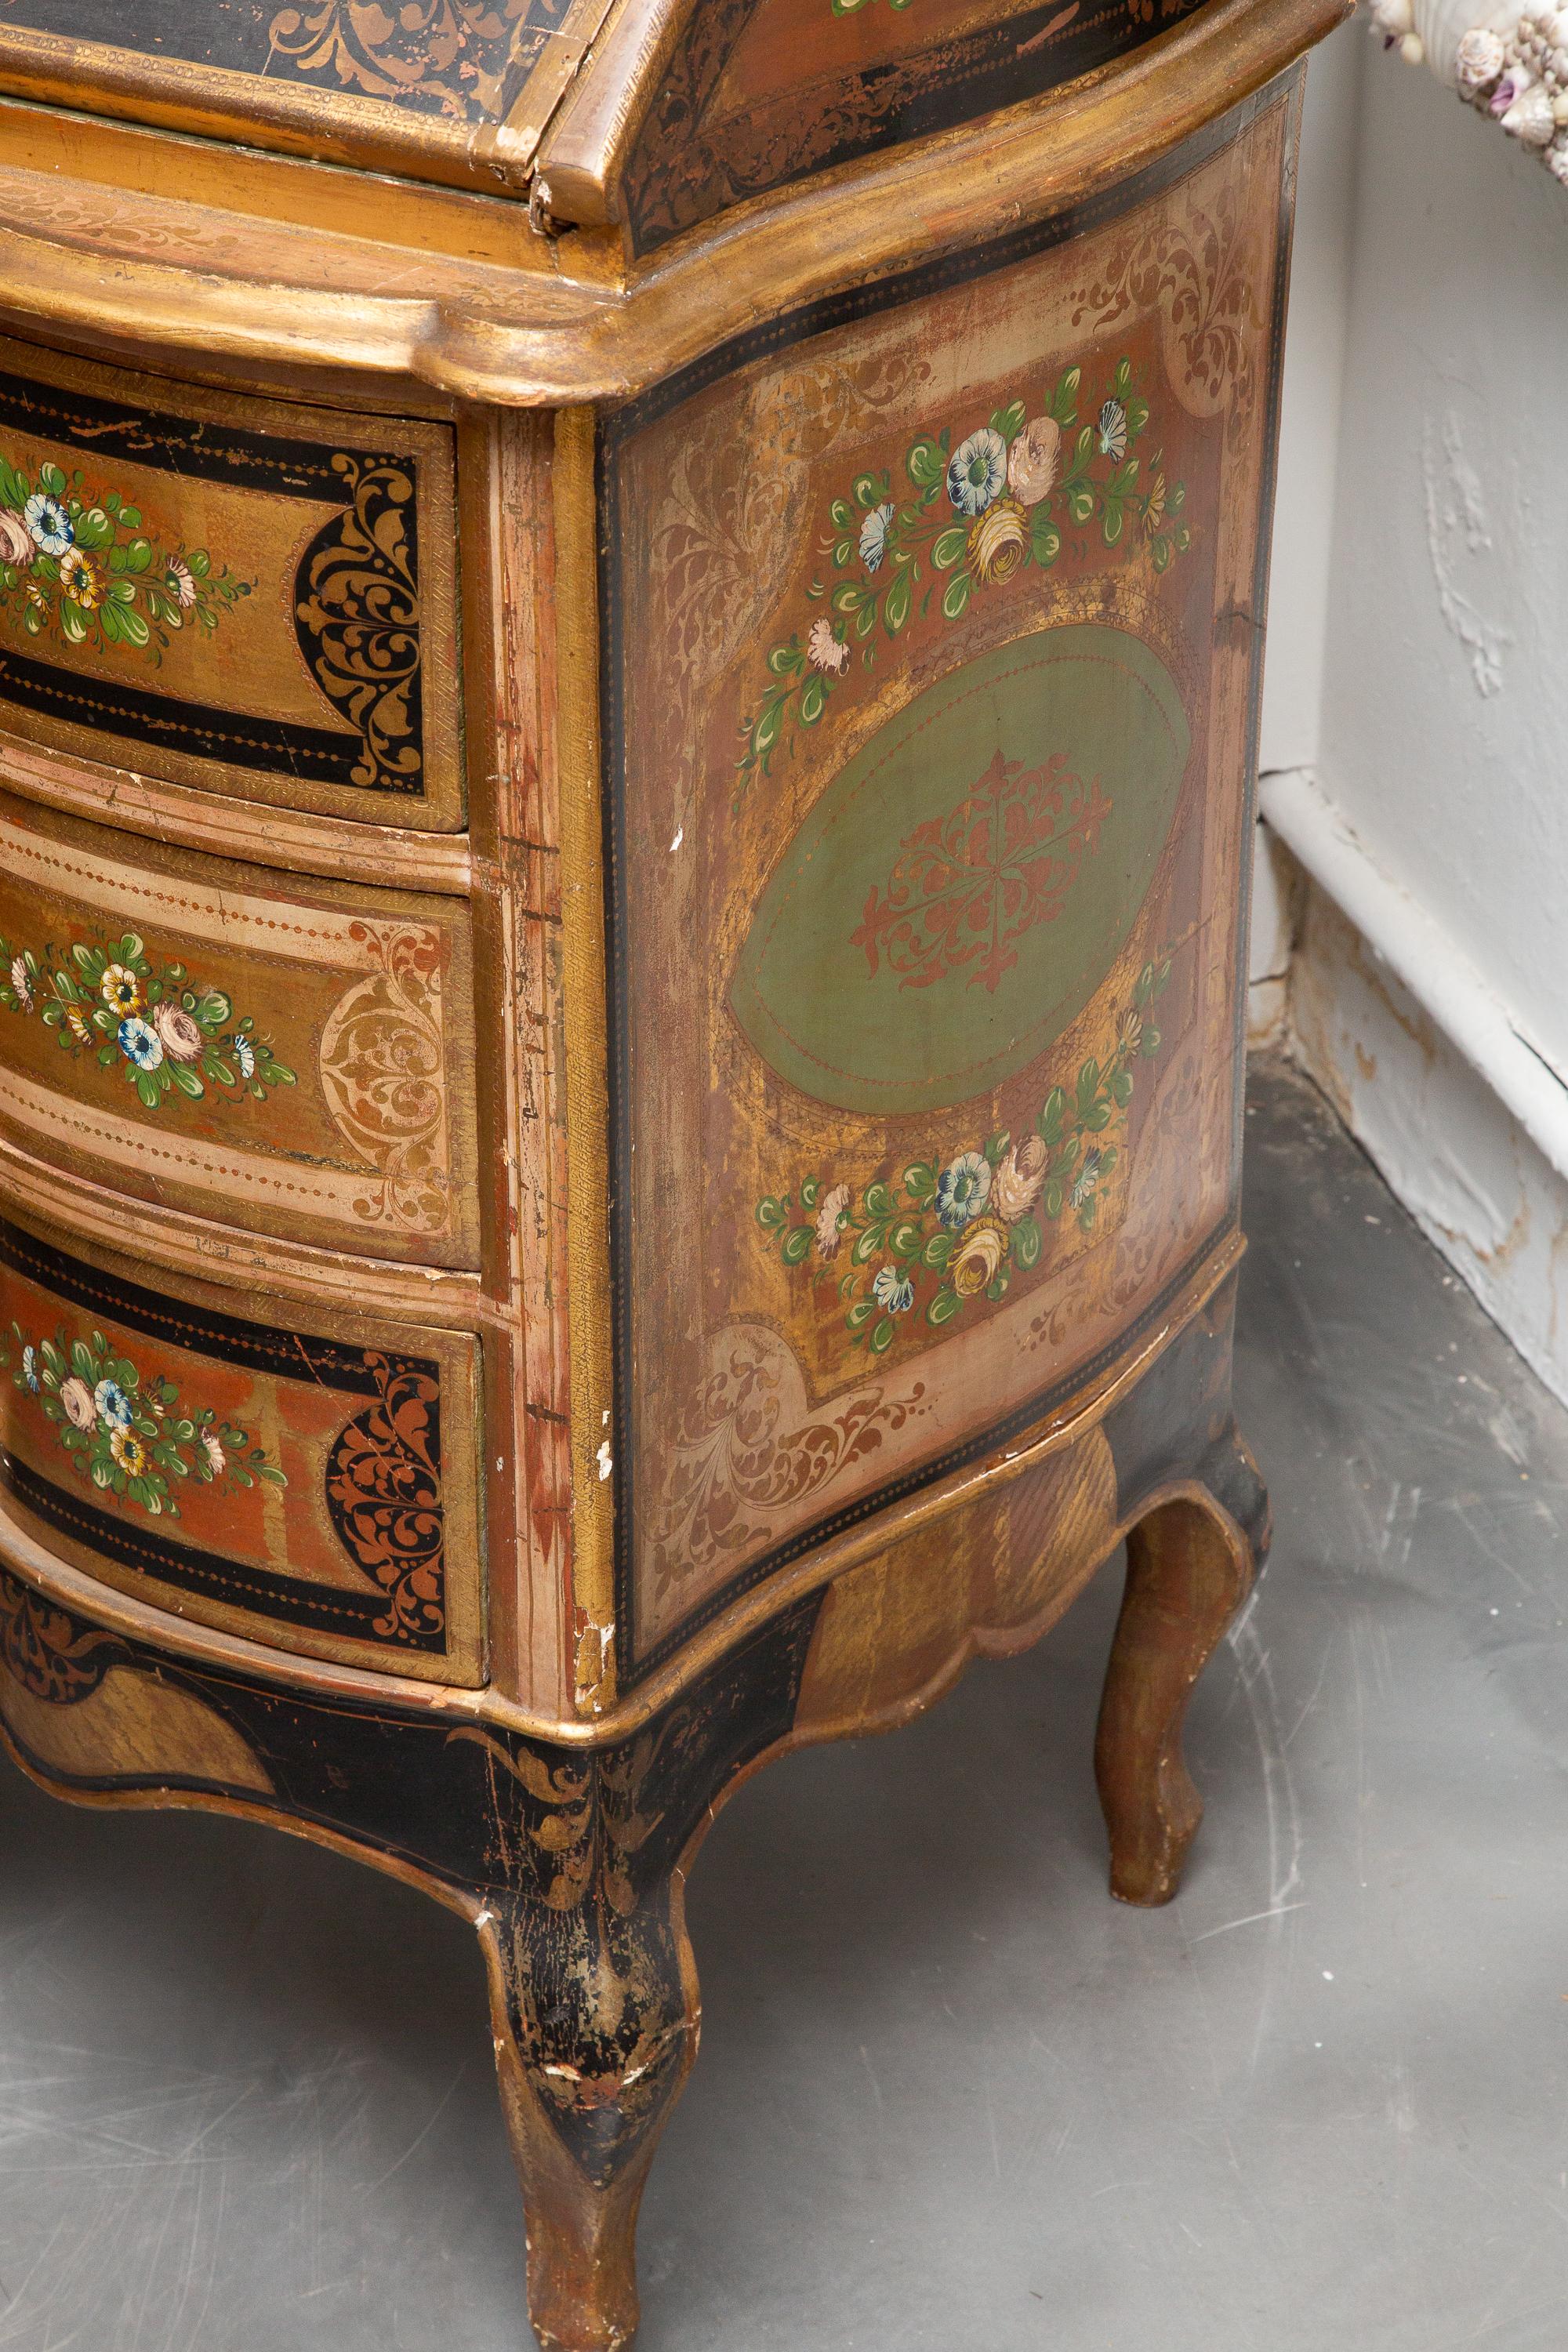 This is a classic Venetian style polychrome lacquered bookcase. This case piece is exquisitely hand painted with floral decoration and overall parcel gilt.